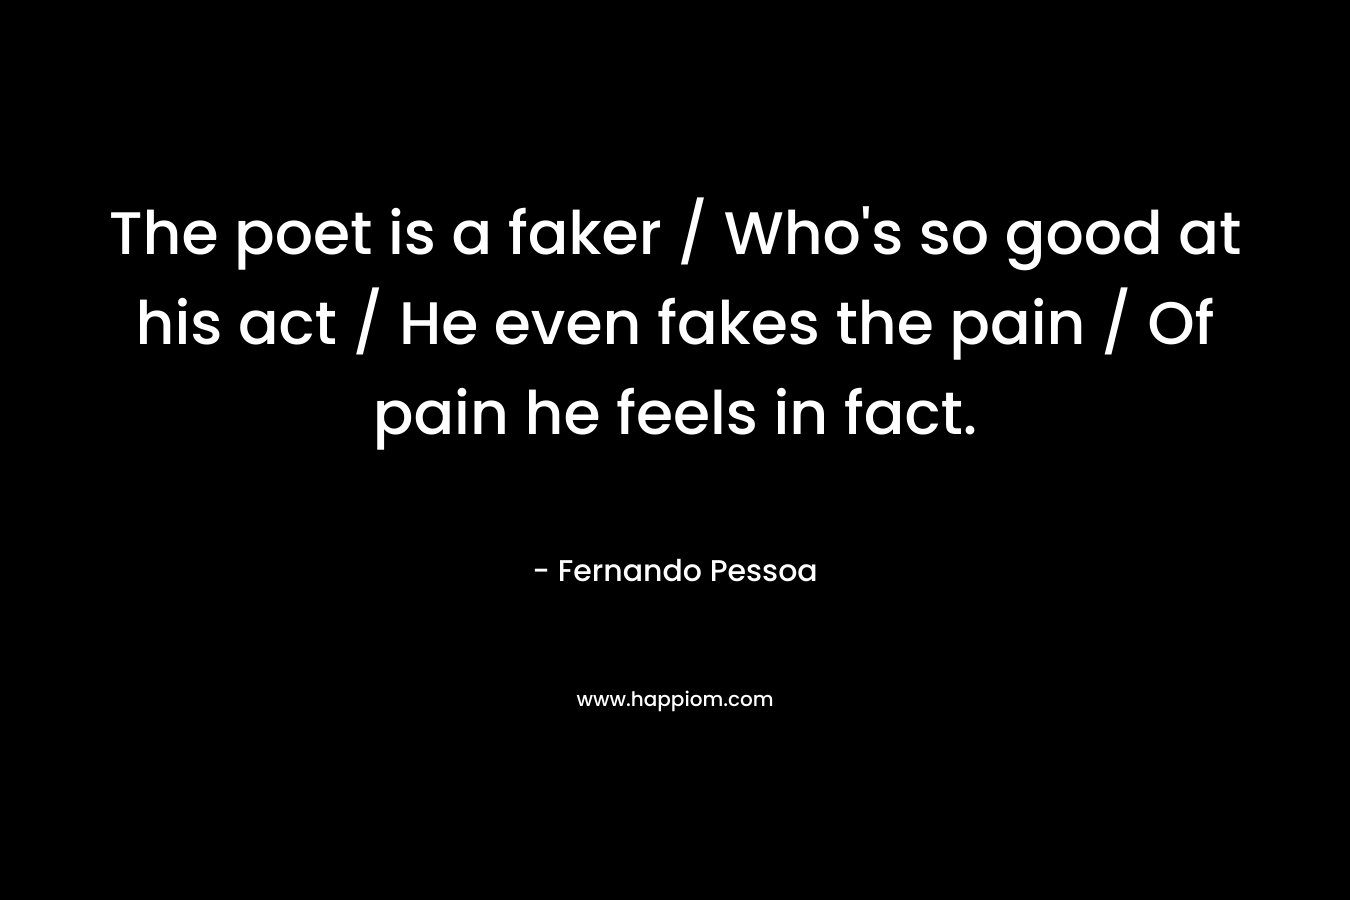 The poet is a faker / Who's so good at his act / He even fakes the pain / Of pain he feels in fact.